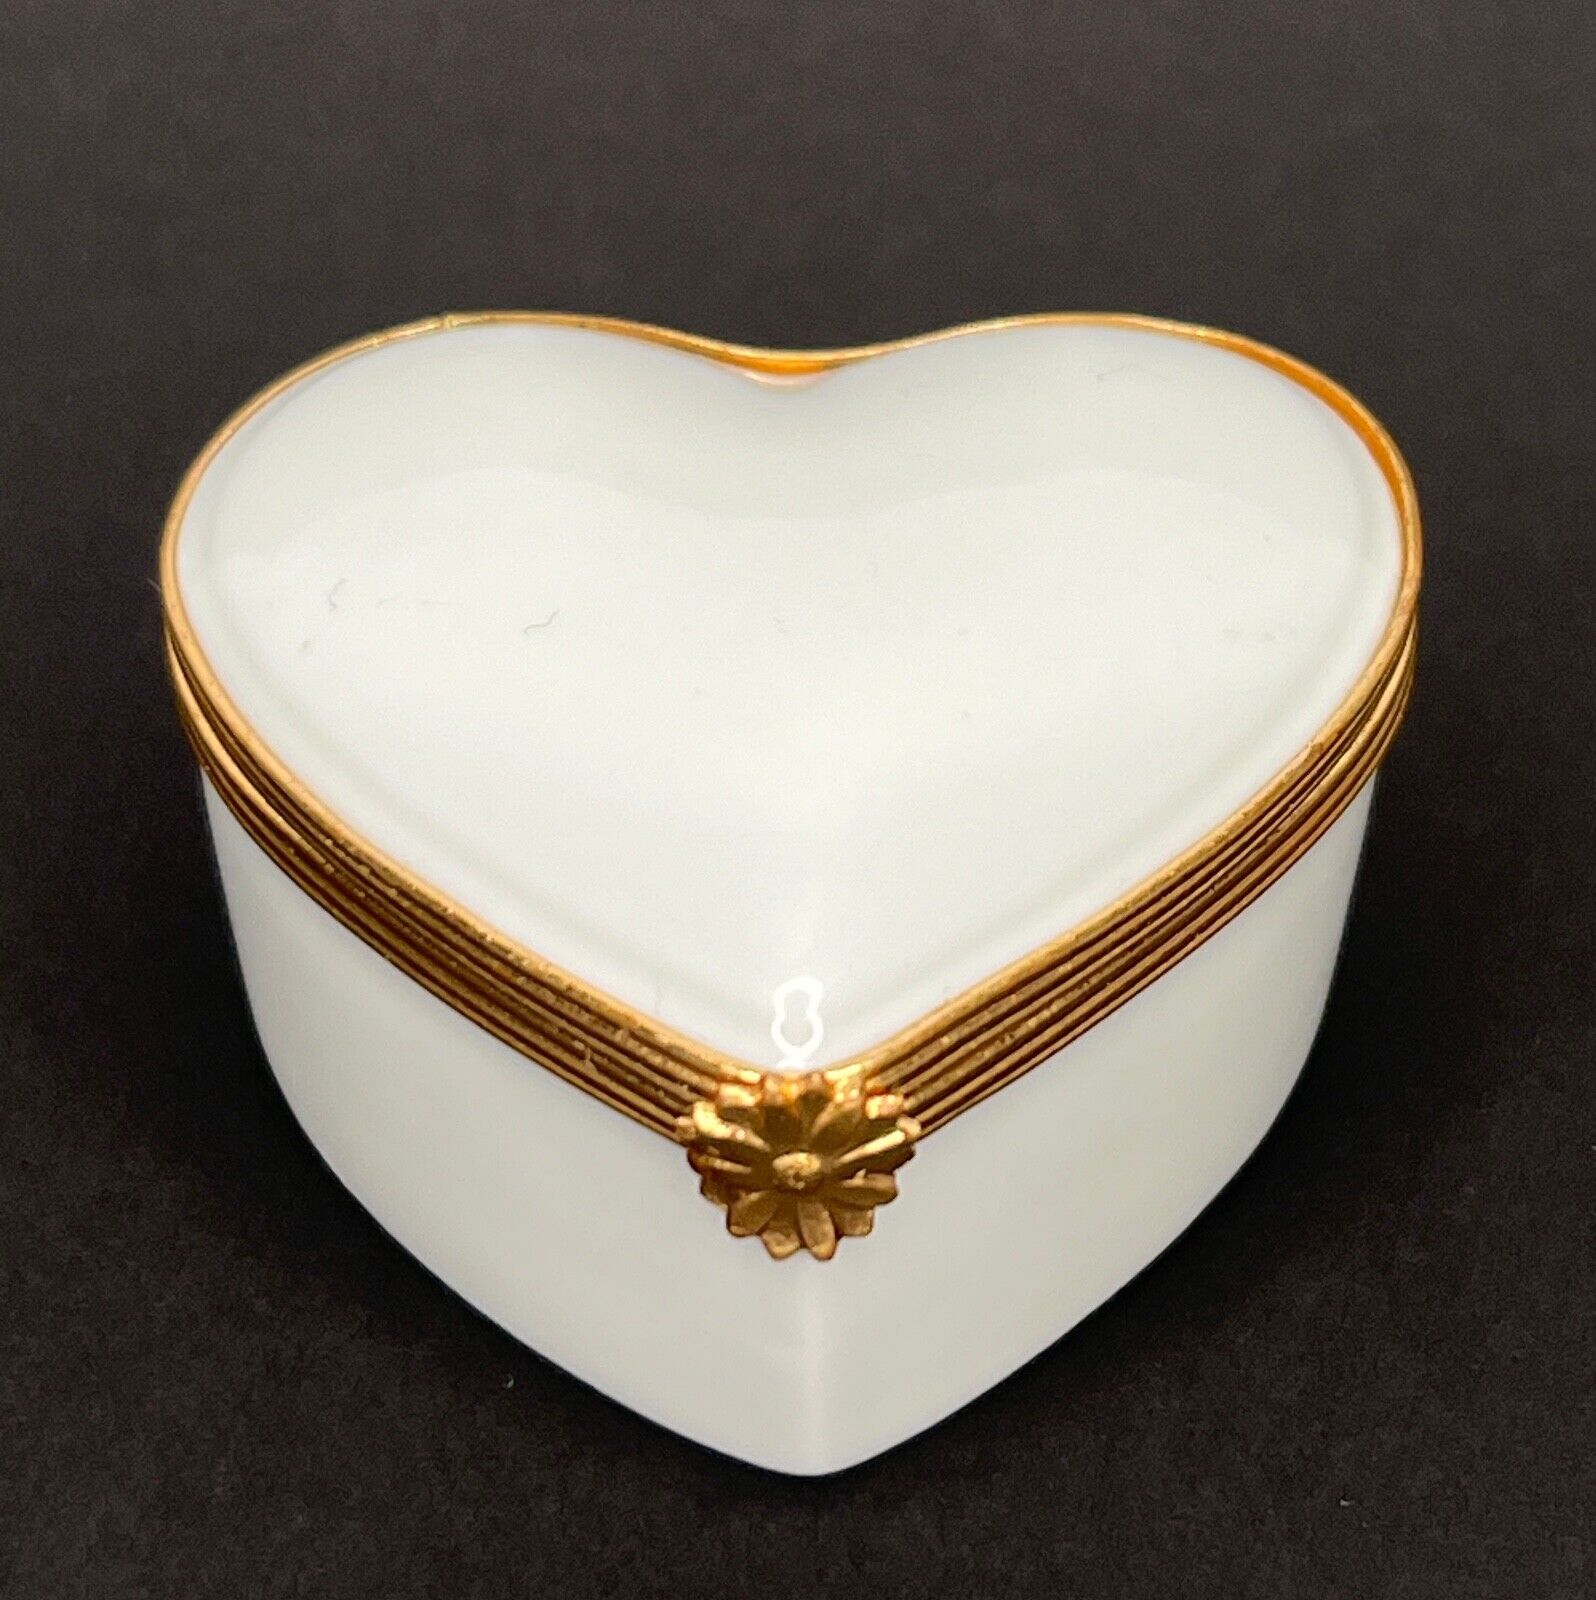 Limoges France Solid White Porcelain Heart Gold-Tone Hinged Small Trinket Box